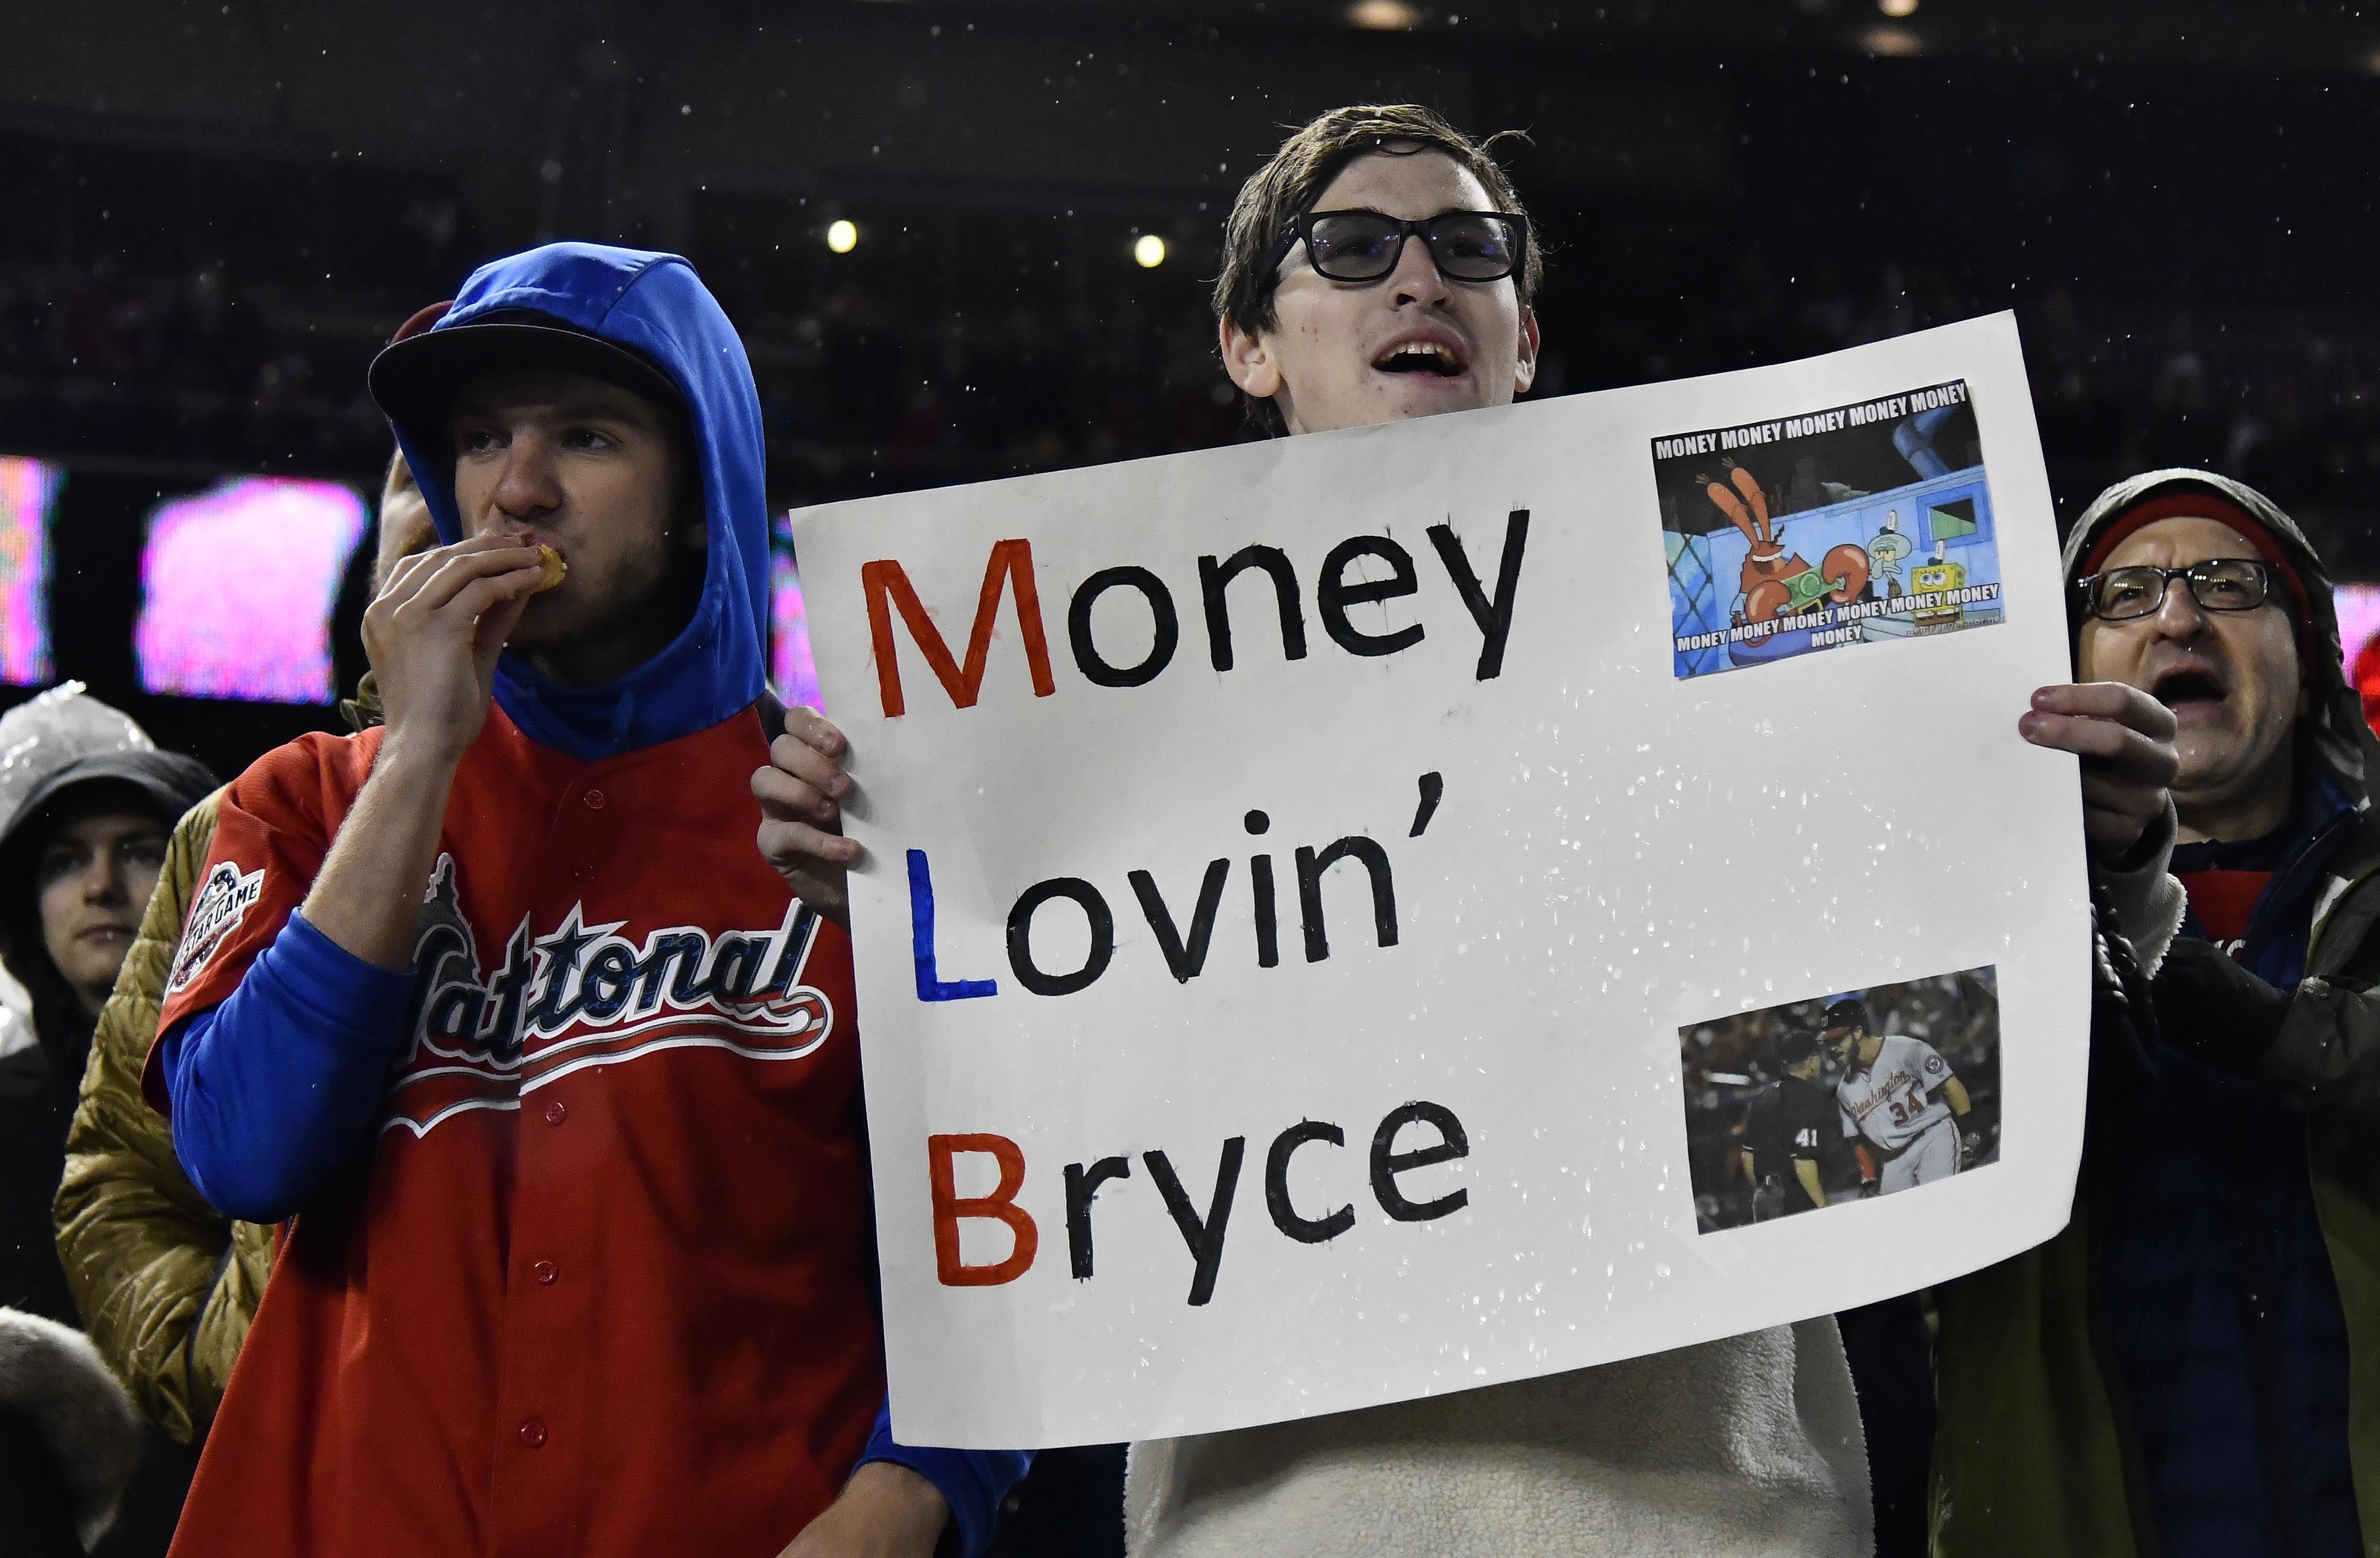 DraftKings Sportsbook Paid Out $90k on Their Bryce Harper Odds Boost Yesterday